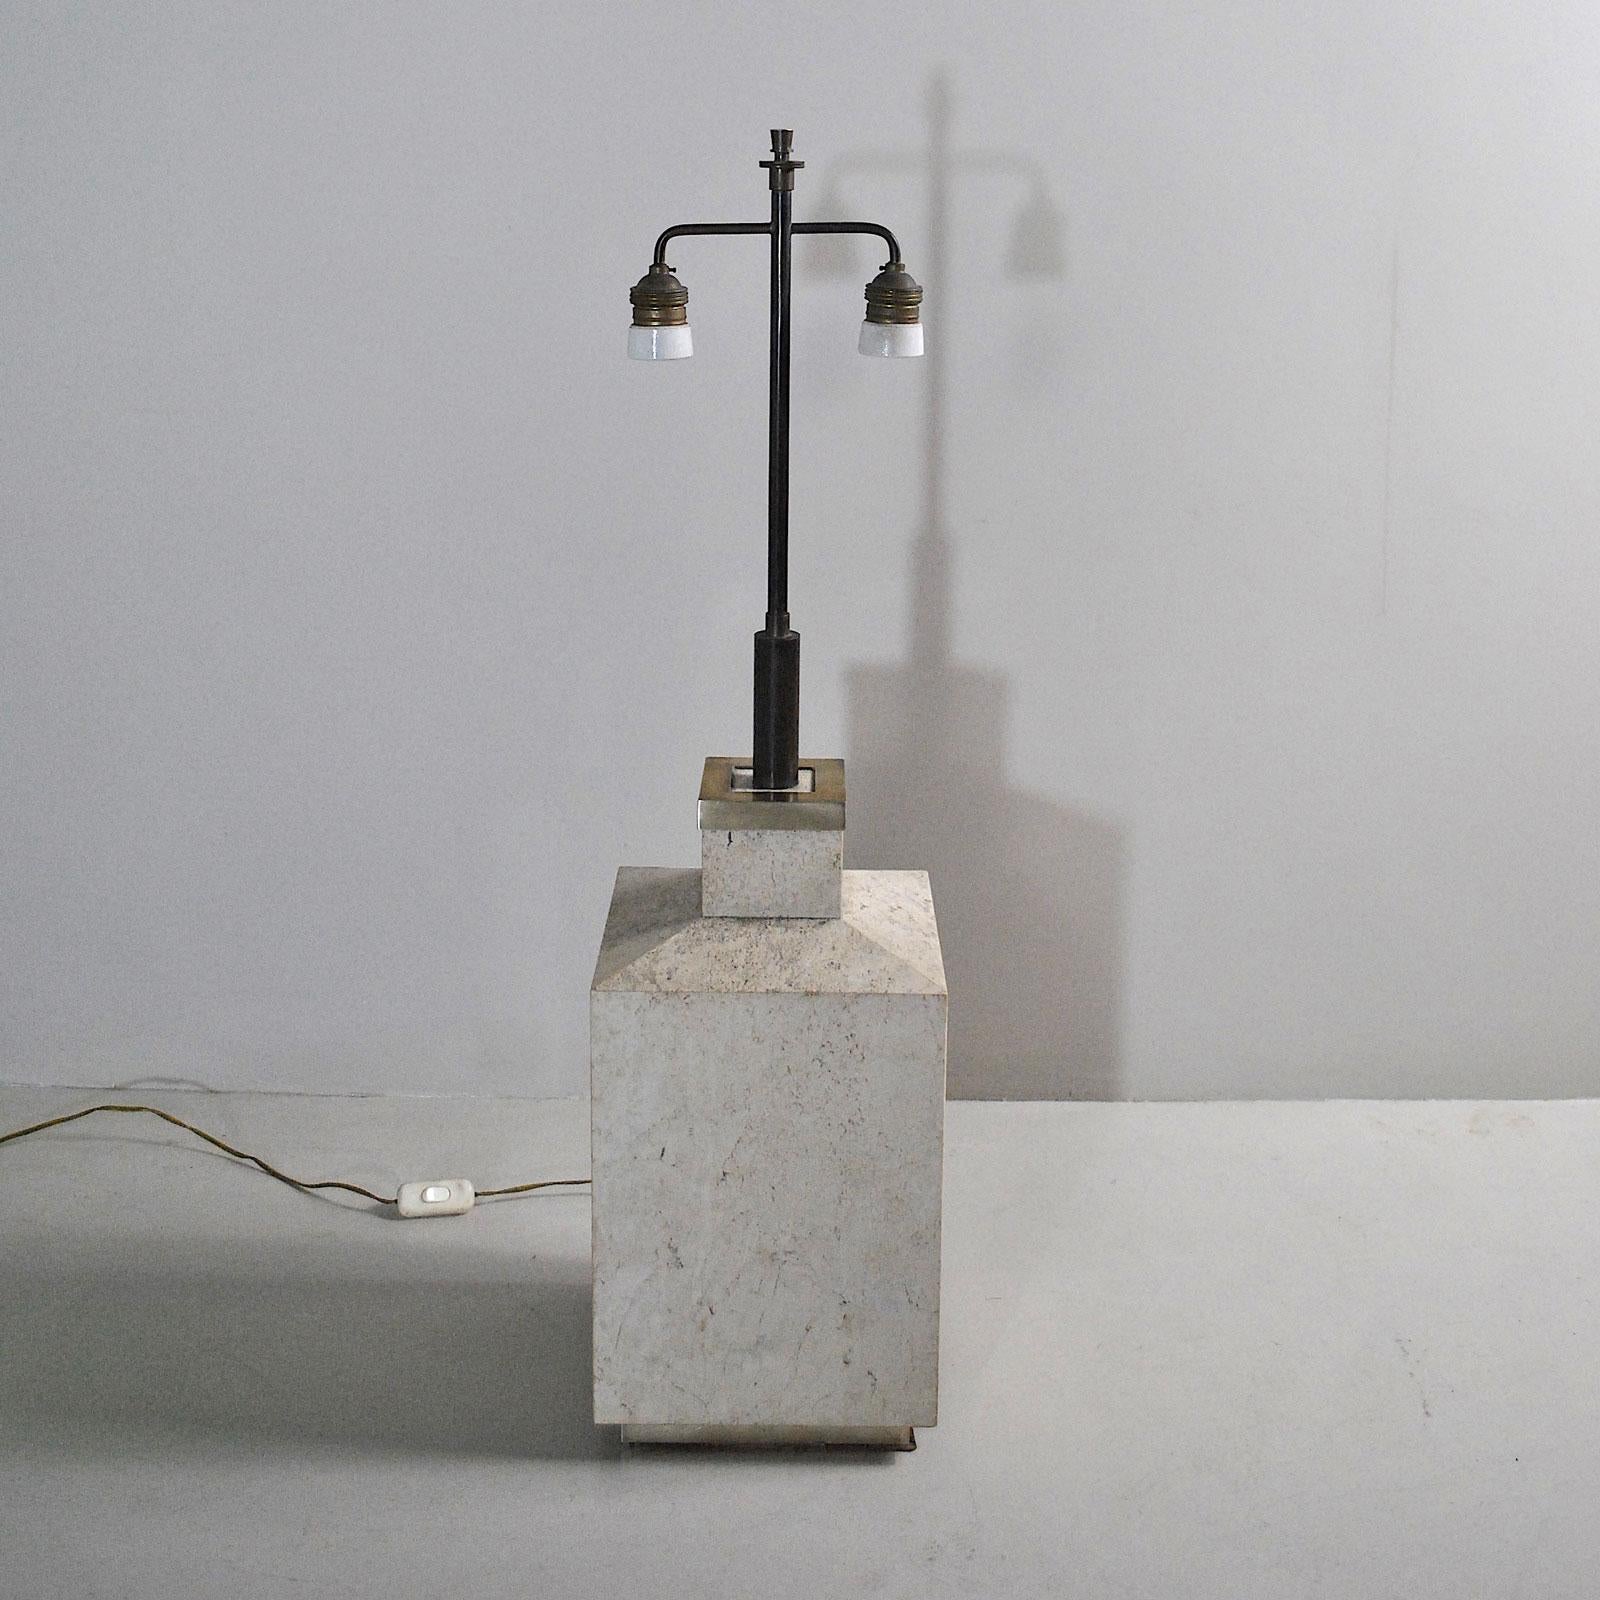 Italian Midcentury Table Lamp Form the 1970s For Sale 1